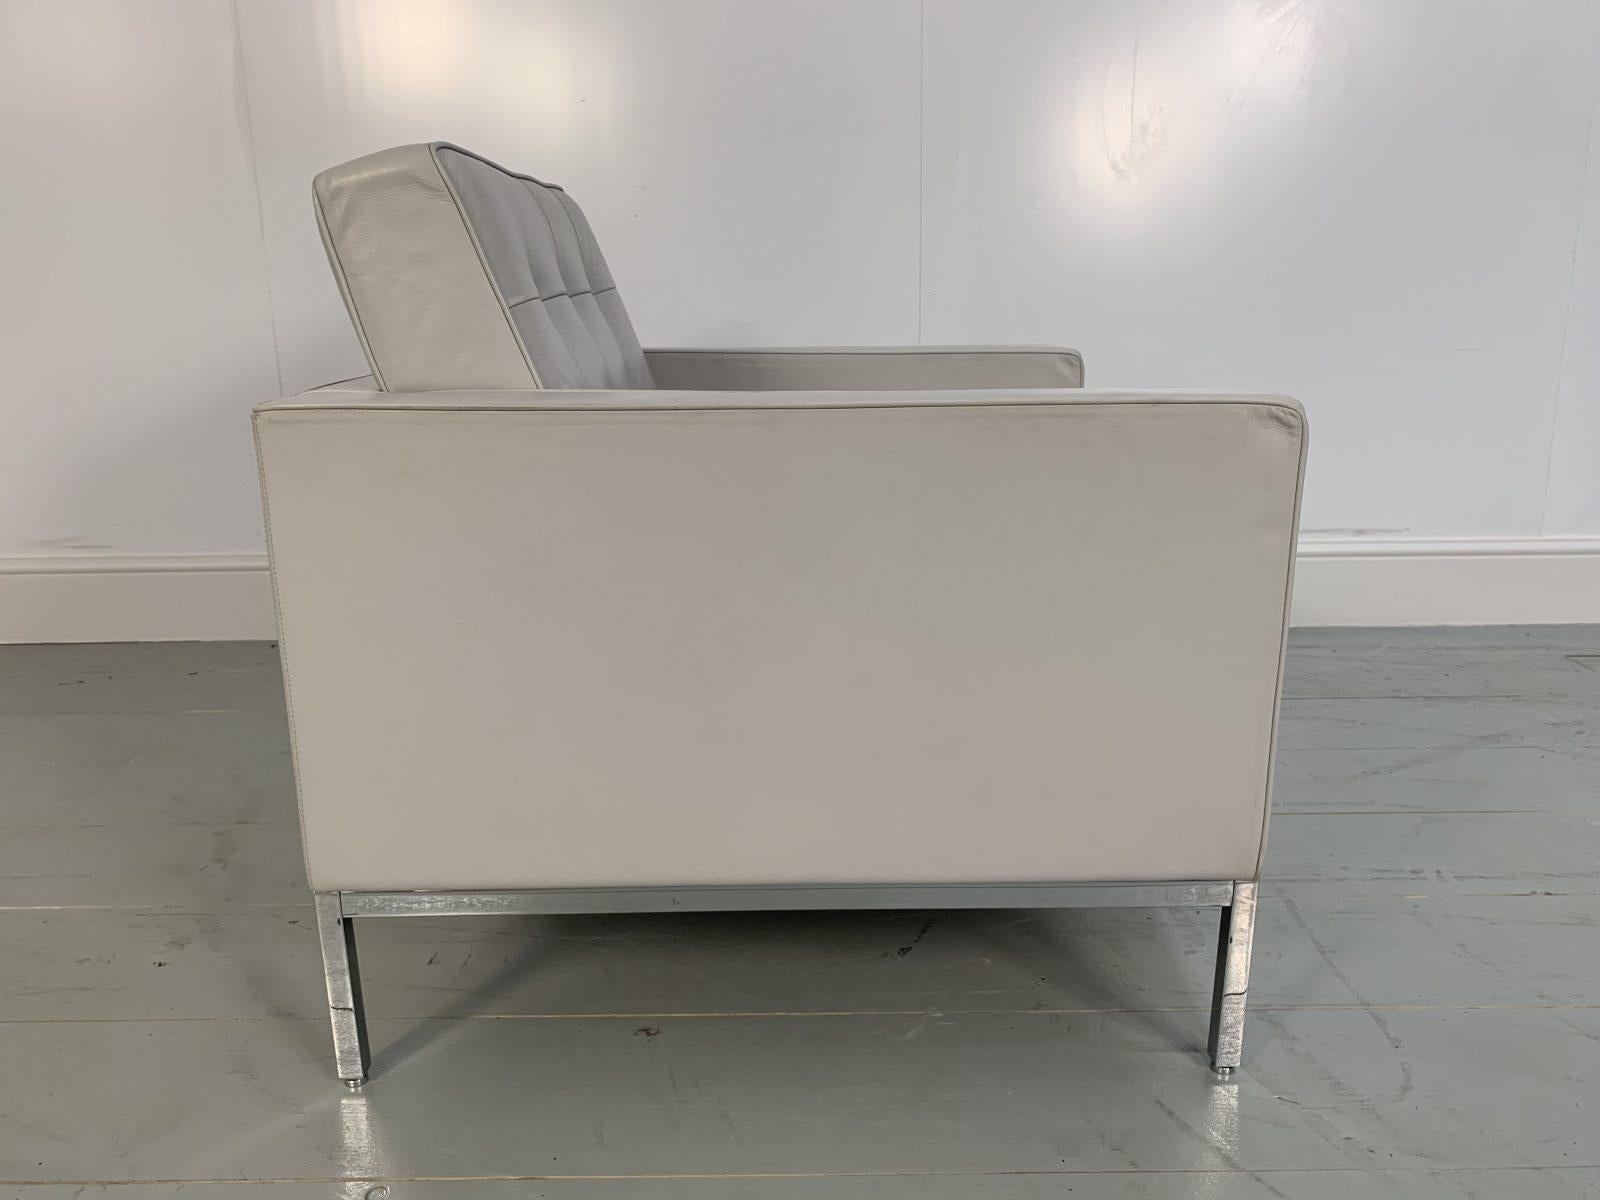 Knoll Studio “Florence Knoll” Lounge Chair Armchair in Pale Grey “Volo” Leather In Good Condition For Sale In Barrowford, GB